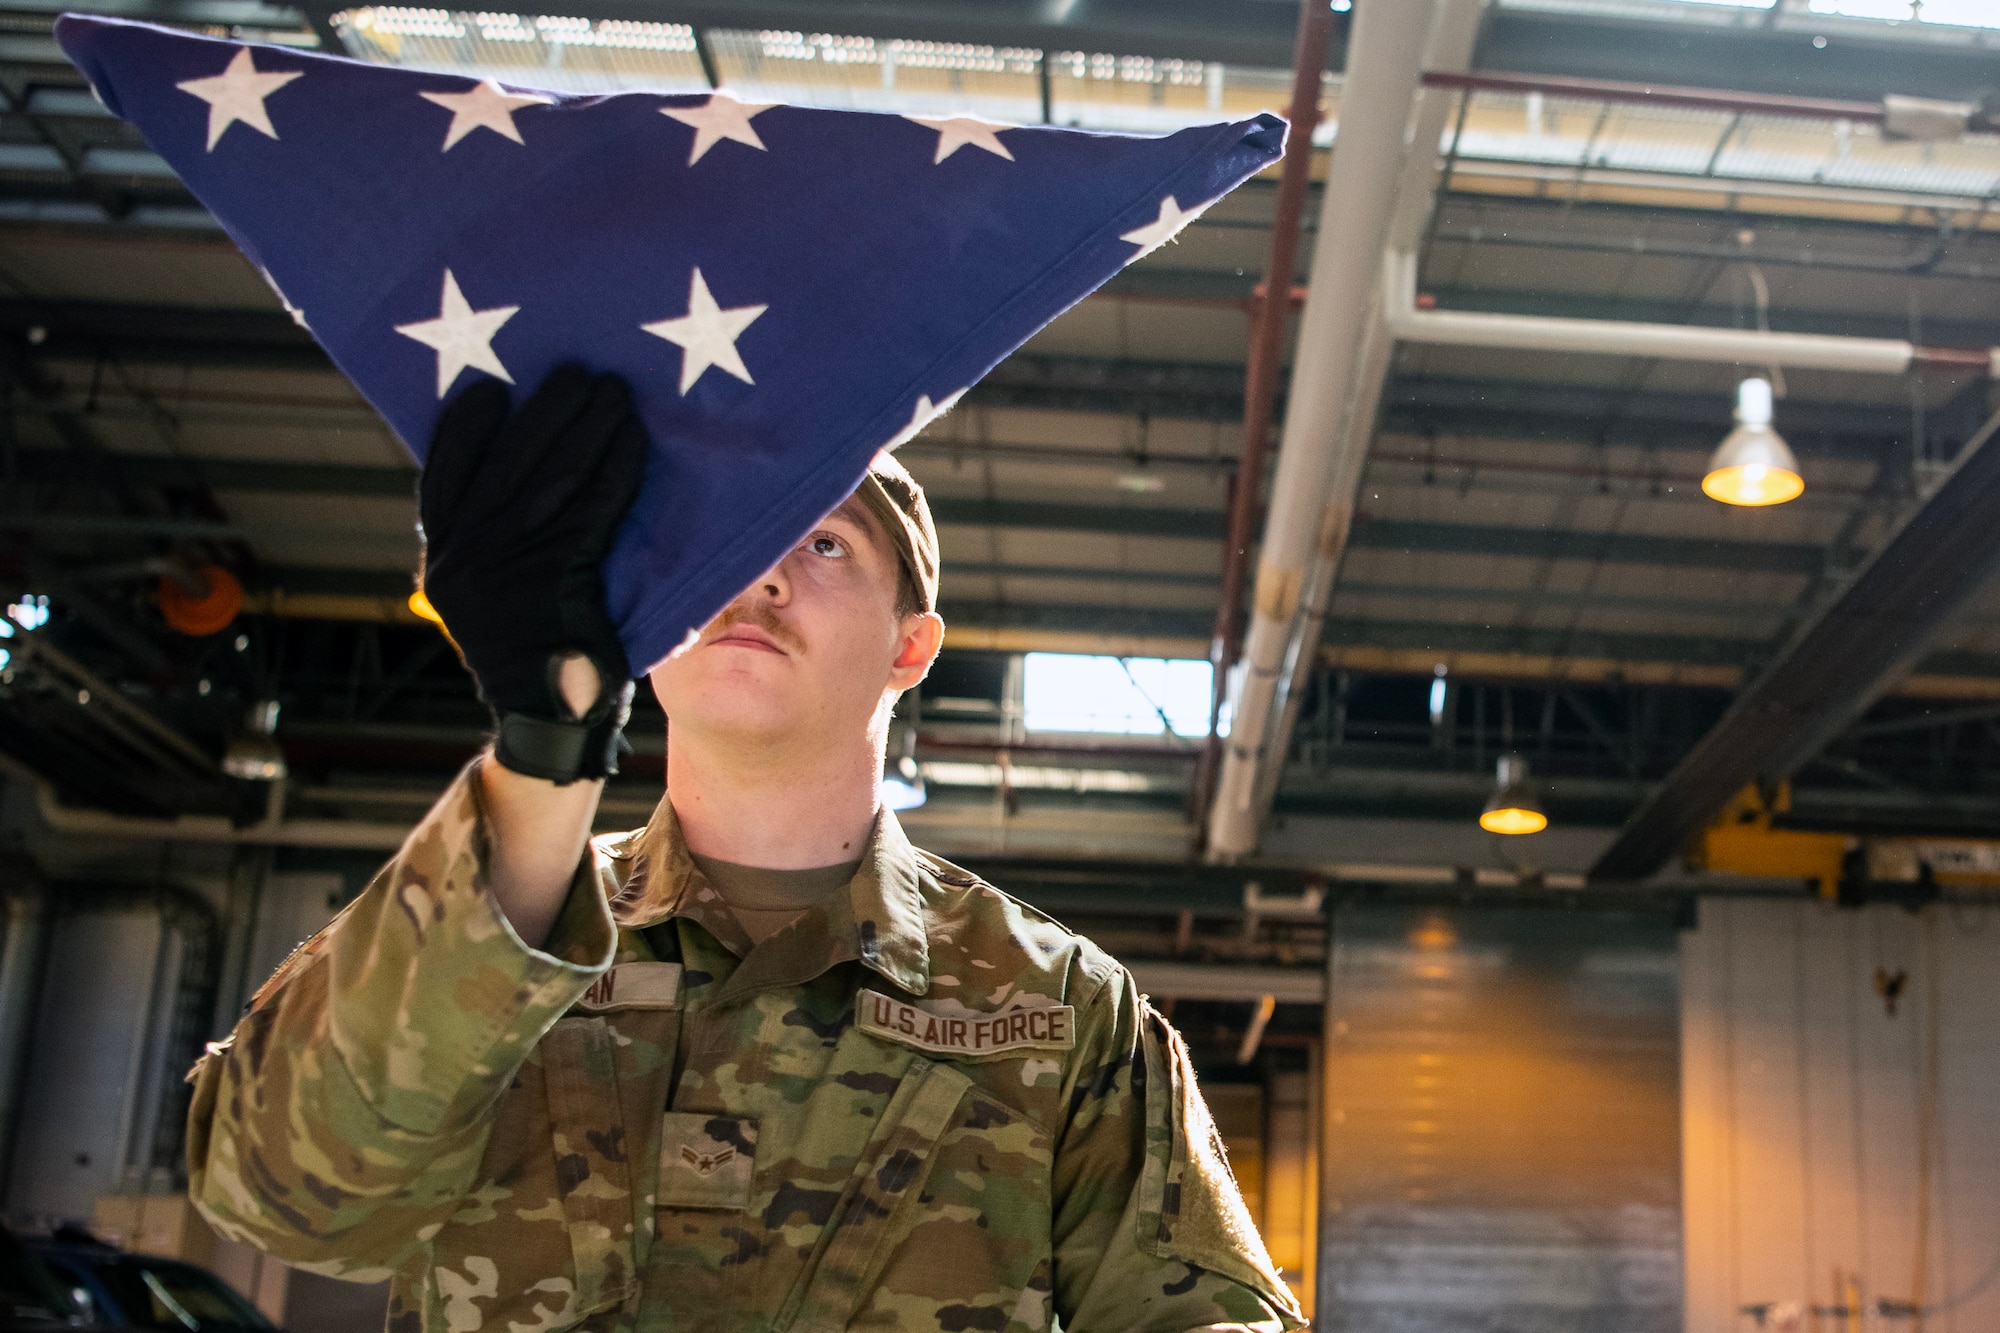 U.S. Air Force Airman 1st Class Spencer Eagan, 423d Air Base Group Honor Guard team member, dresses a flag at RAF Alconbury, England, April 21, 2023. In order to become HG members, Airmen must complete rigorous initial training to ensure they are qualified to render military honors. (U.S. Air Force photo by Staff Sgt. Eugene Oliver)